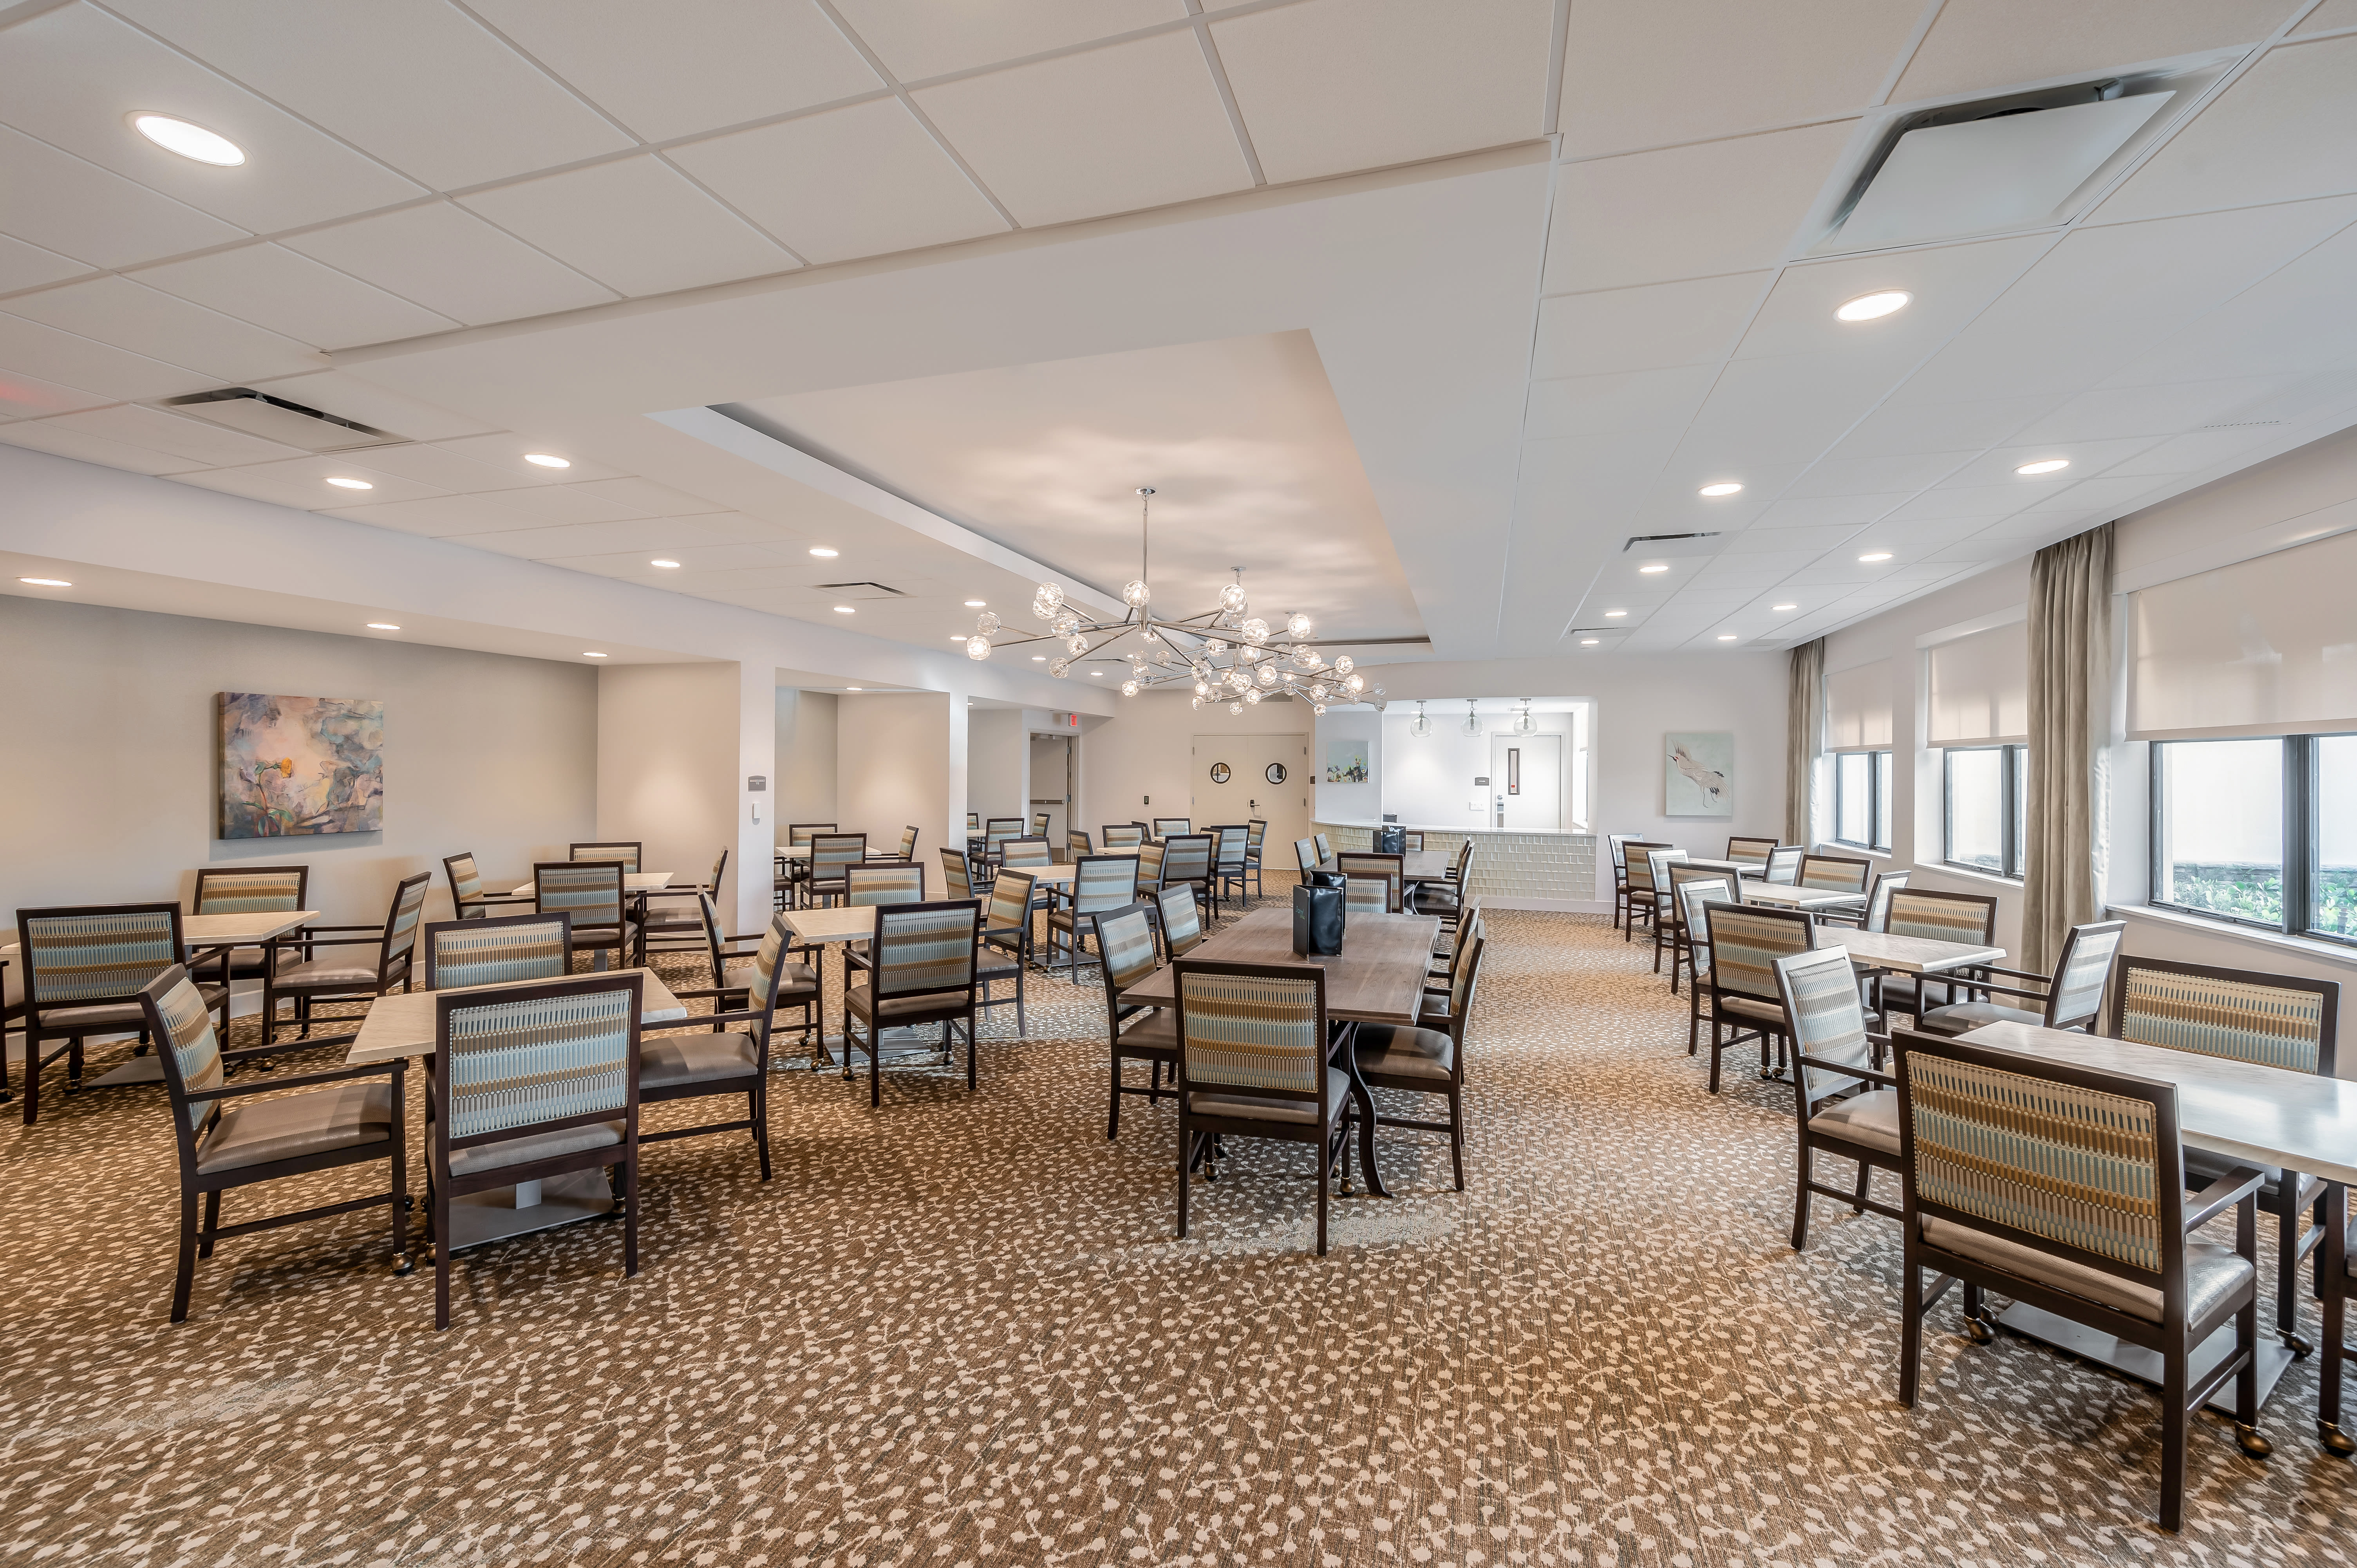 Learn about our dining program at Inspired Living Royal Palm Beach in Royal Palm Beach, Florida